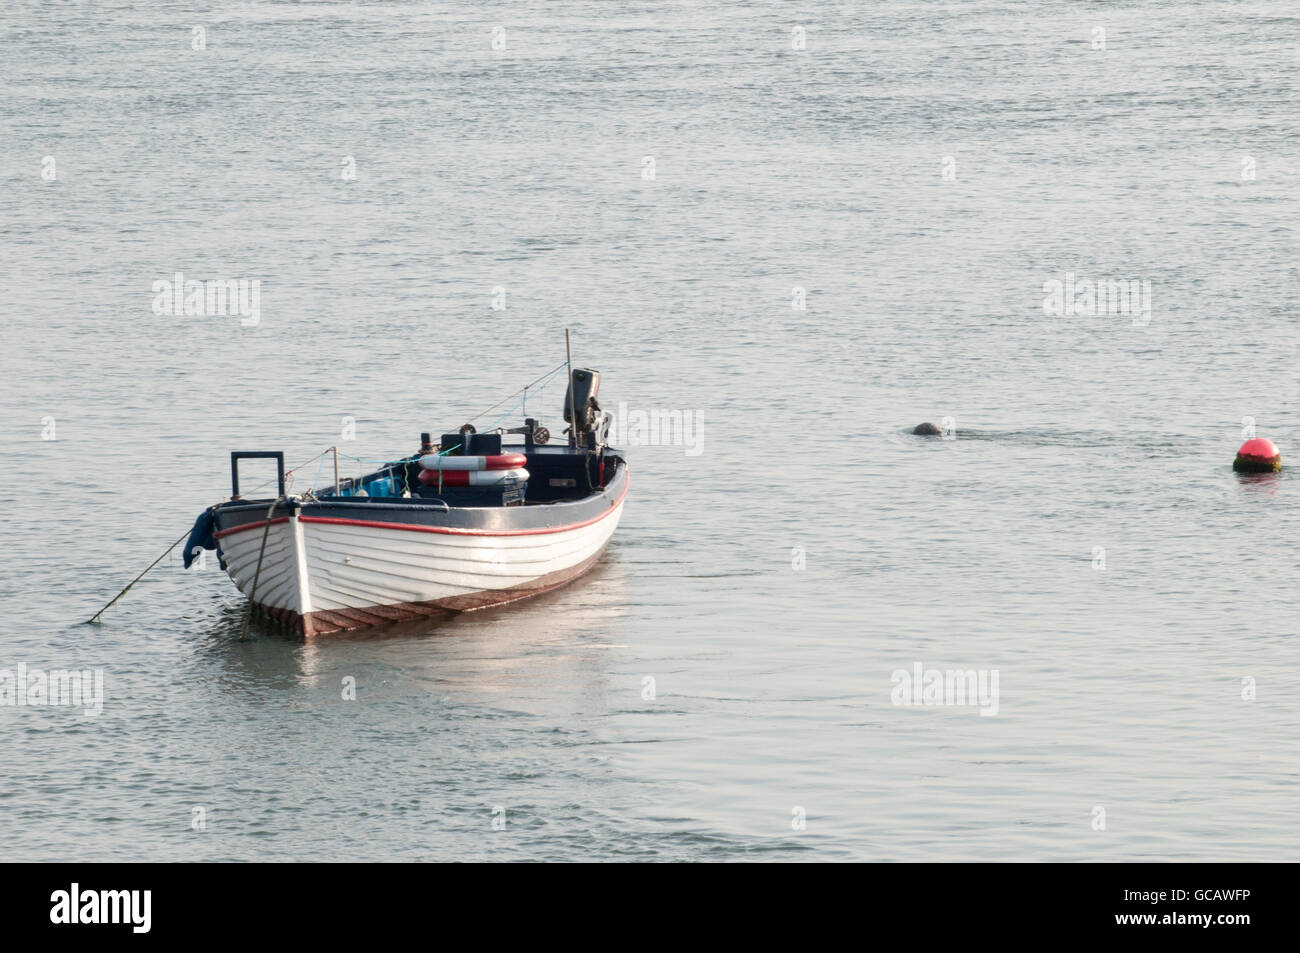 Small fishing boat at sunrise, moored in the water ready for sailing Stock Photo